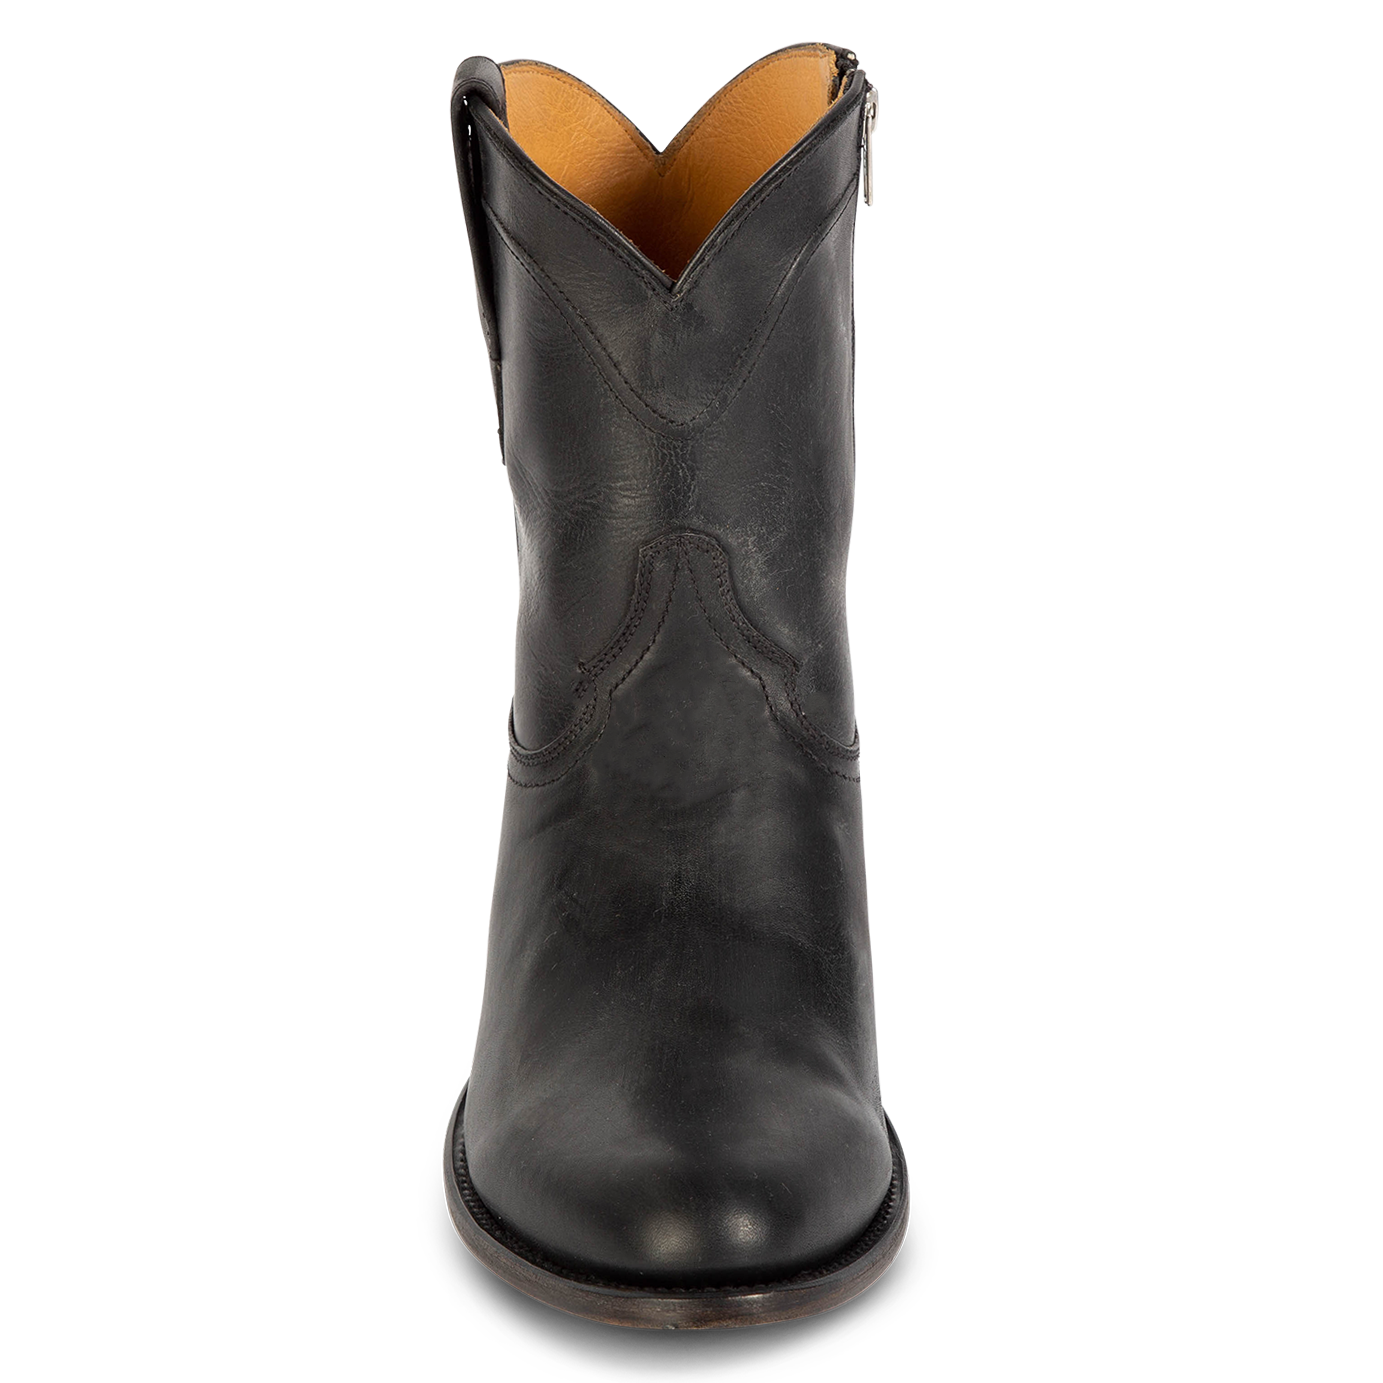 Front view showing traditional detailing on shaft and front dip on FREEBIRD men's Henderson black leather mid calf boot